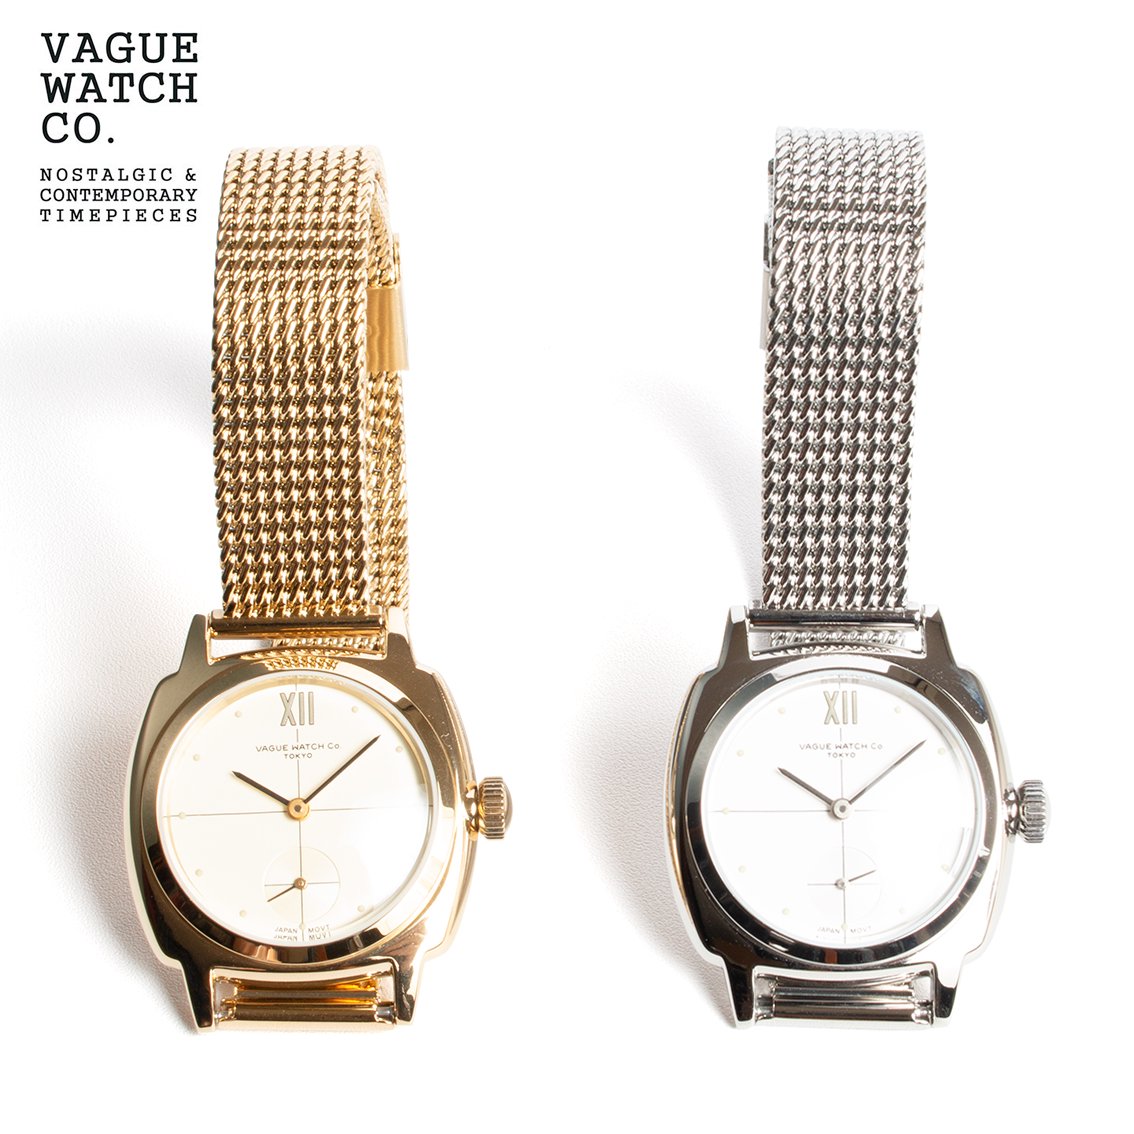 [VAGUE WATCH Co. / ヴァーグウォッチカンパニー] COUSSIN Sophie クッション ソフィ 腕時計 32mm  CO-L-010 - HARTLEY